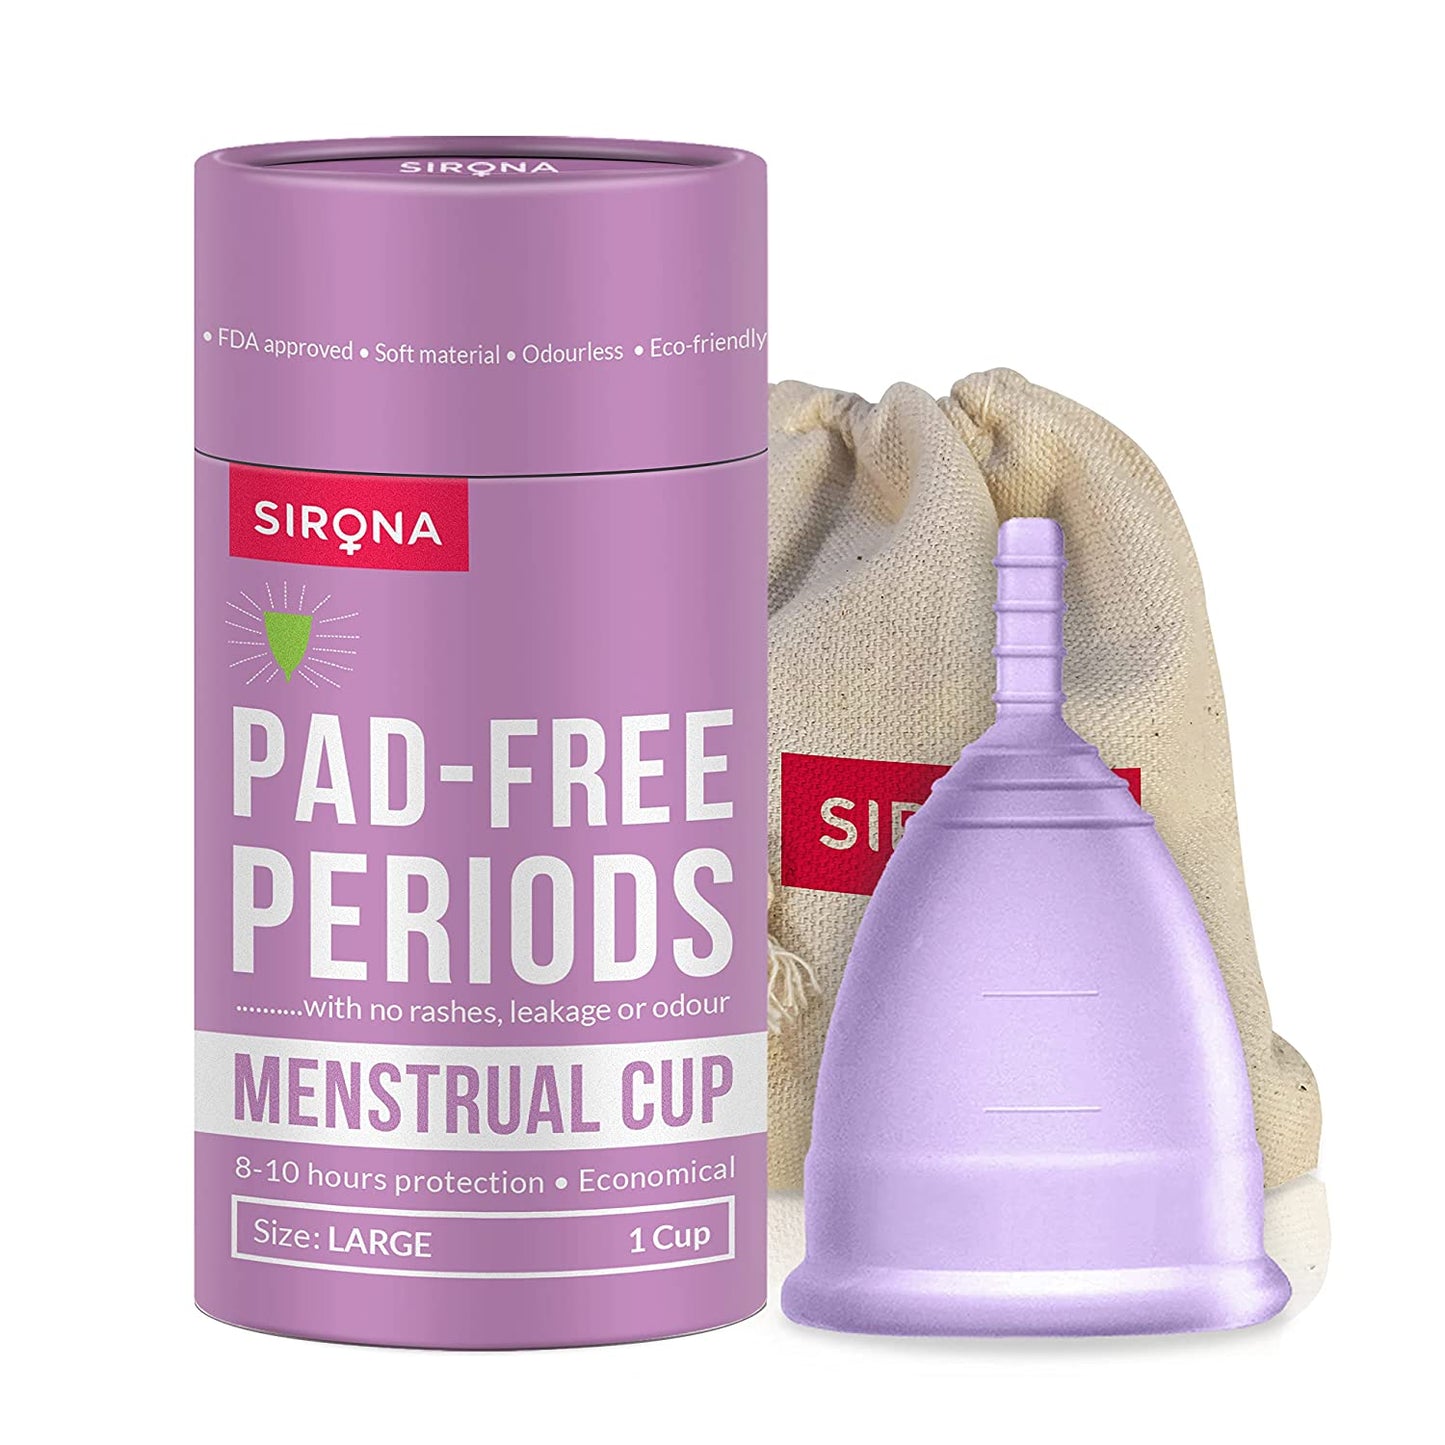 Sirona Reusable Menstrual Cup for Women Large - 1 Cup